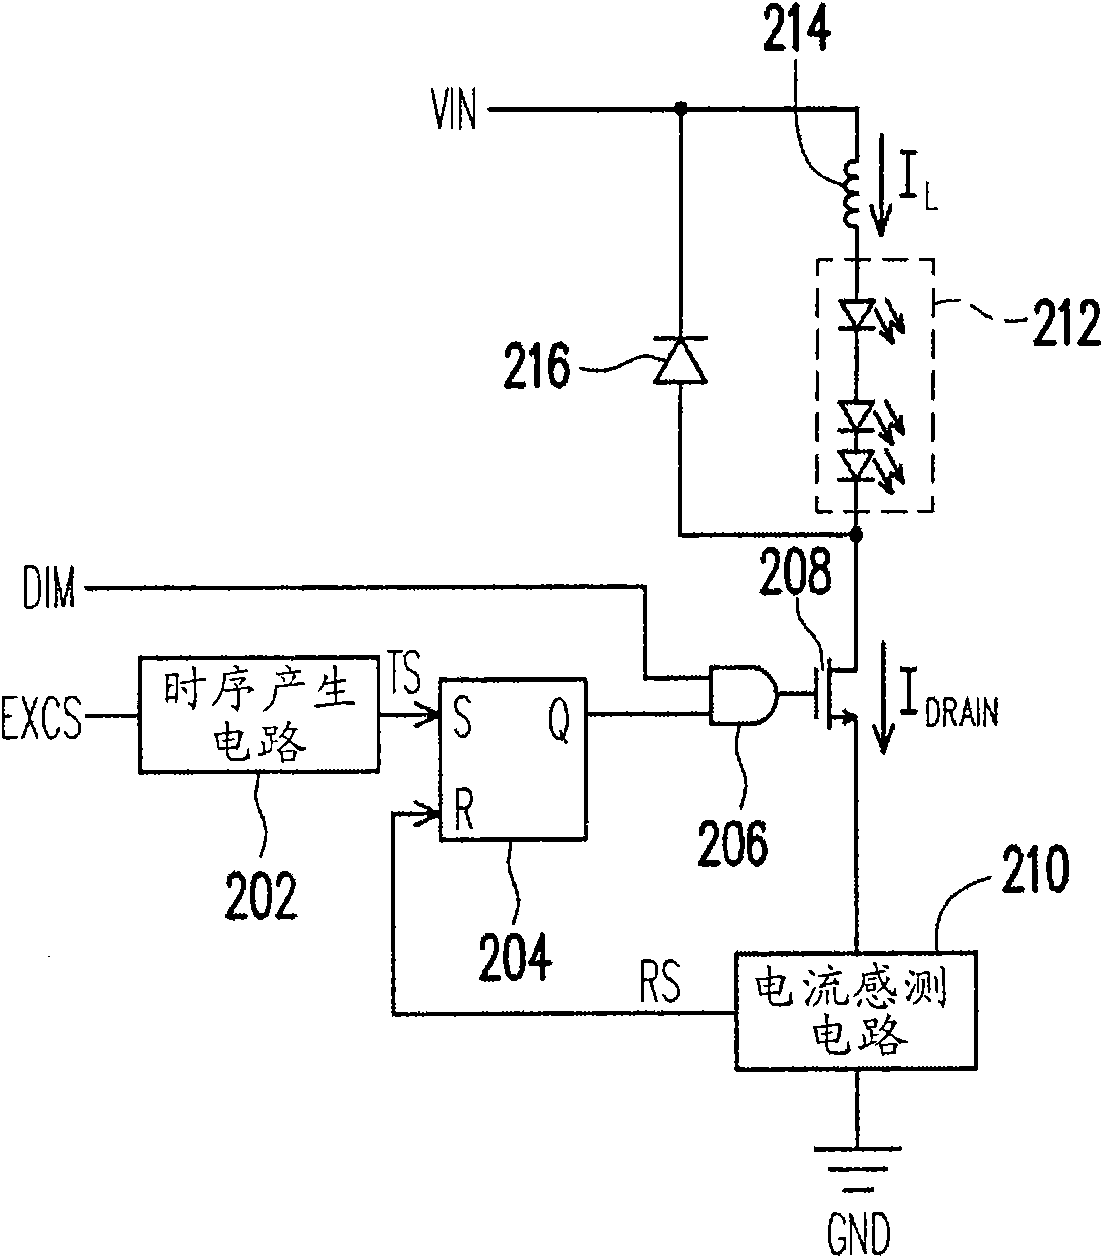 Luminous element drive circuit and method thereof